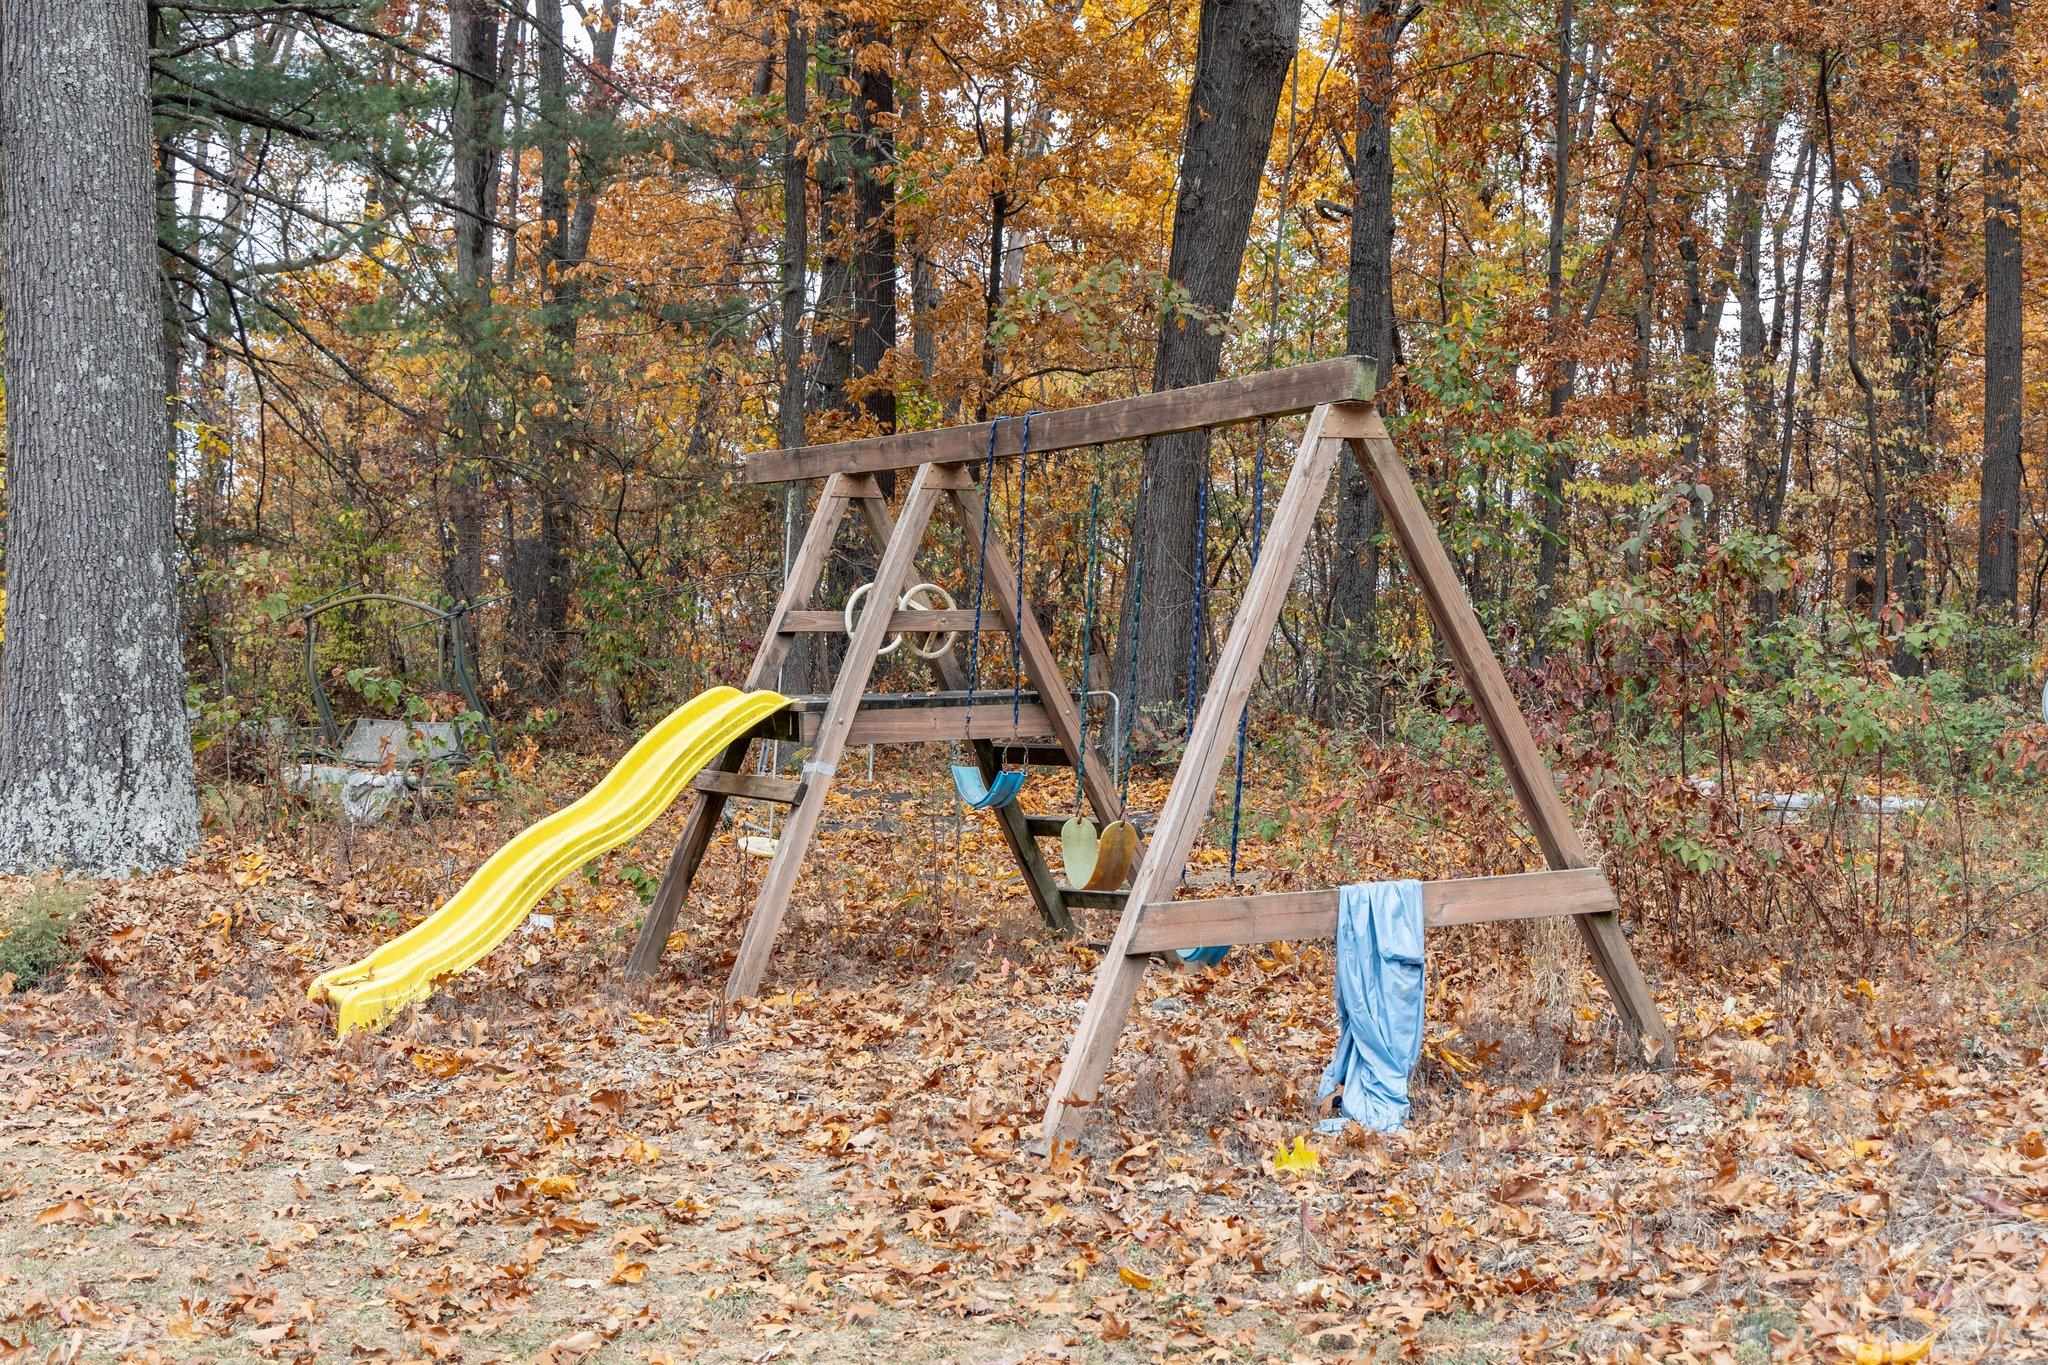 for family fun outdoors!